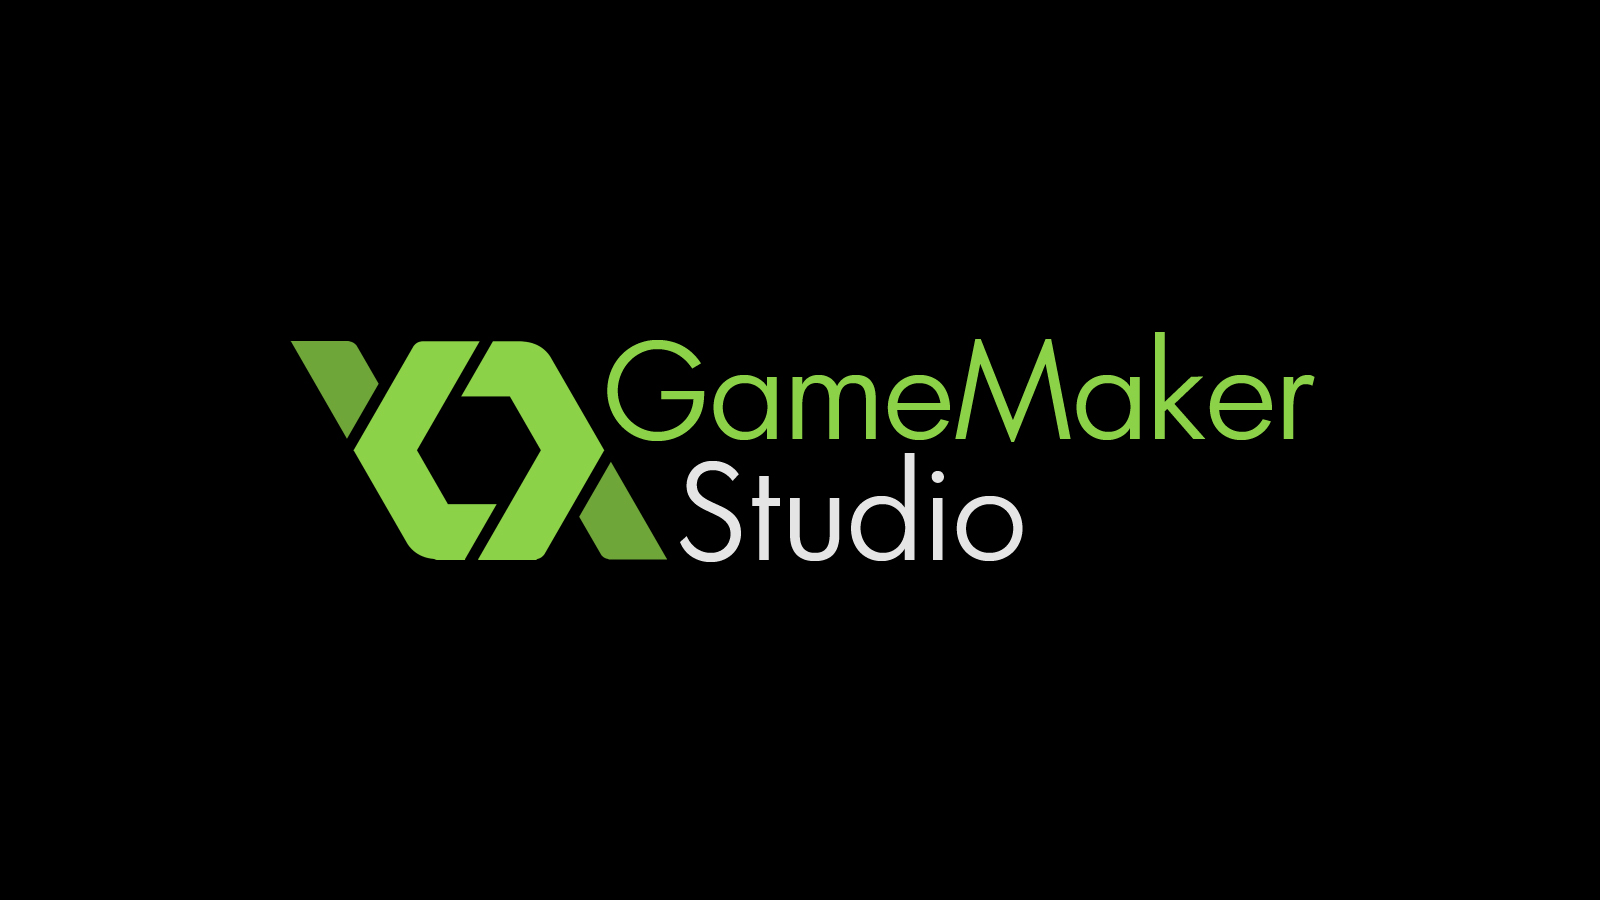 Grab the Humble GameMaker Bundle and join our upcoming game jam